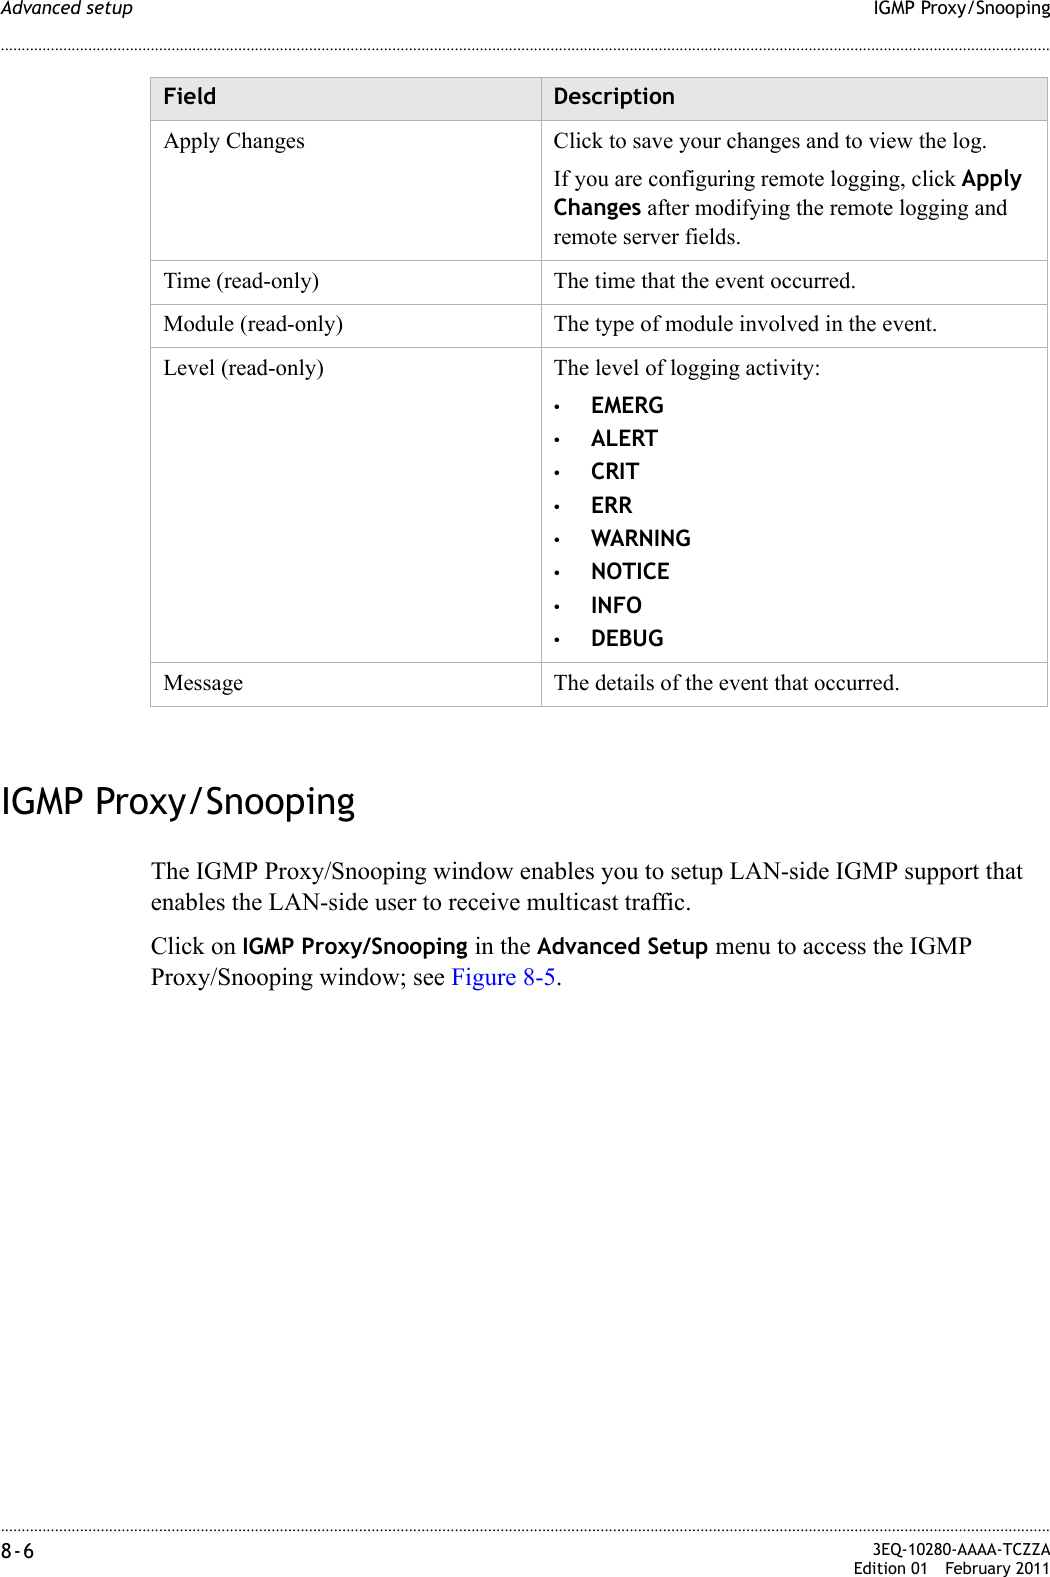 ............................................................................................................................................................................................................................................................IGMP Proxy/SnoopingAdvanced setup8-6  3EQ-10280-AAAA-TCZZAEdition 01 February 2011............................................................................................................................................................................................................................................................IGMP Proxy/SnoopingThe IGMP Proxy/Snooping window enables you to setup LAN-side IGMP support that enables the LAN-side user to receive multicast traffic.Click on IGMP Proxy/Snooping in the Advanced Setup menu to access the IGMP Proxy/Snooping window; see Figure 8-5.Apply Changes Click to save your changes and to view the log.If you are configuring remote logging, click Apply Changes after modifying the remote logging and remote server fields.Time (read-only) The time that the event occurred.Module (read-only) The type of module involved in the event.Level (read-only) The level of logging activity:•EMERG•ALERT•CRIT•ERR•WARNING•NOTICE•INFO•DEBUGMessage The details of the event that occurred.Field Description